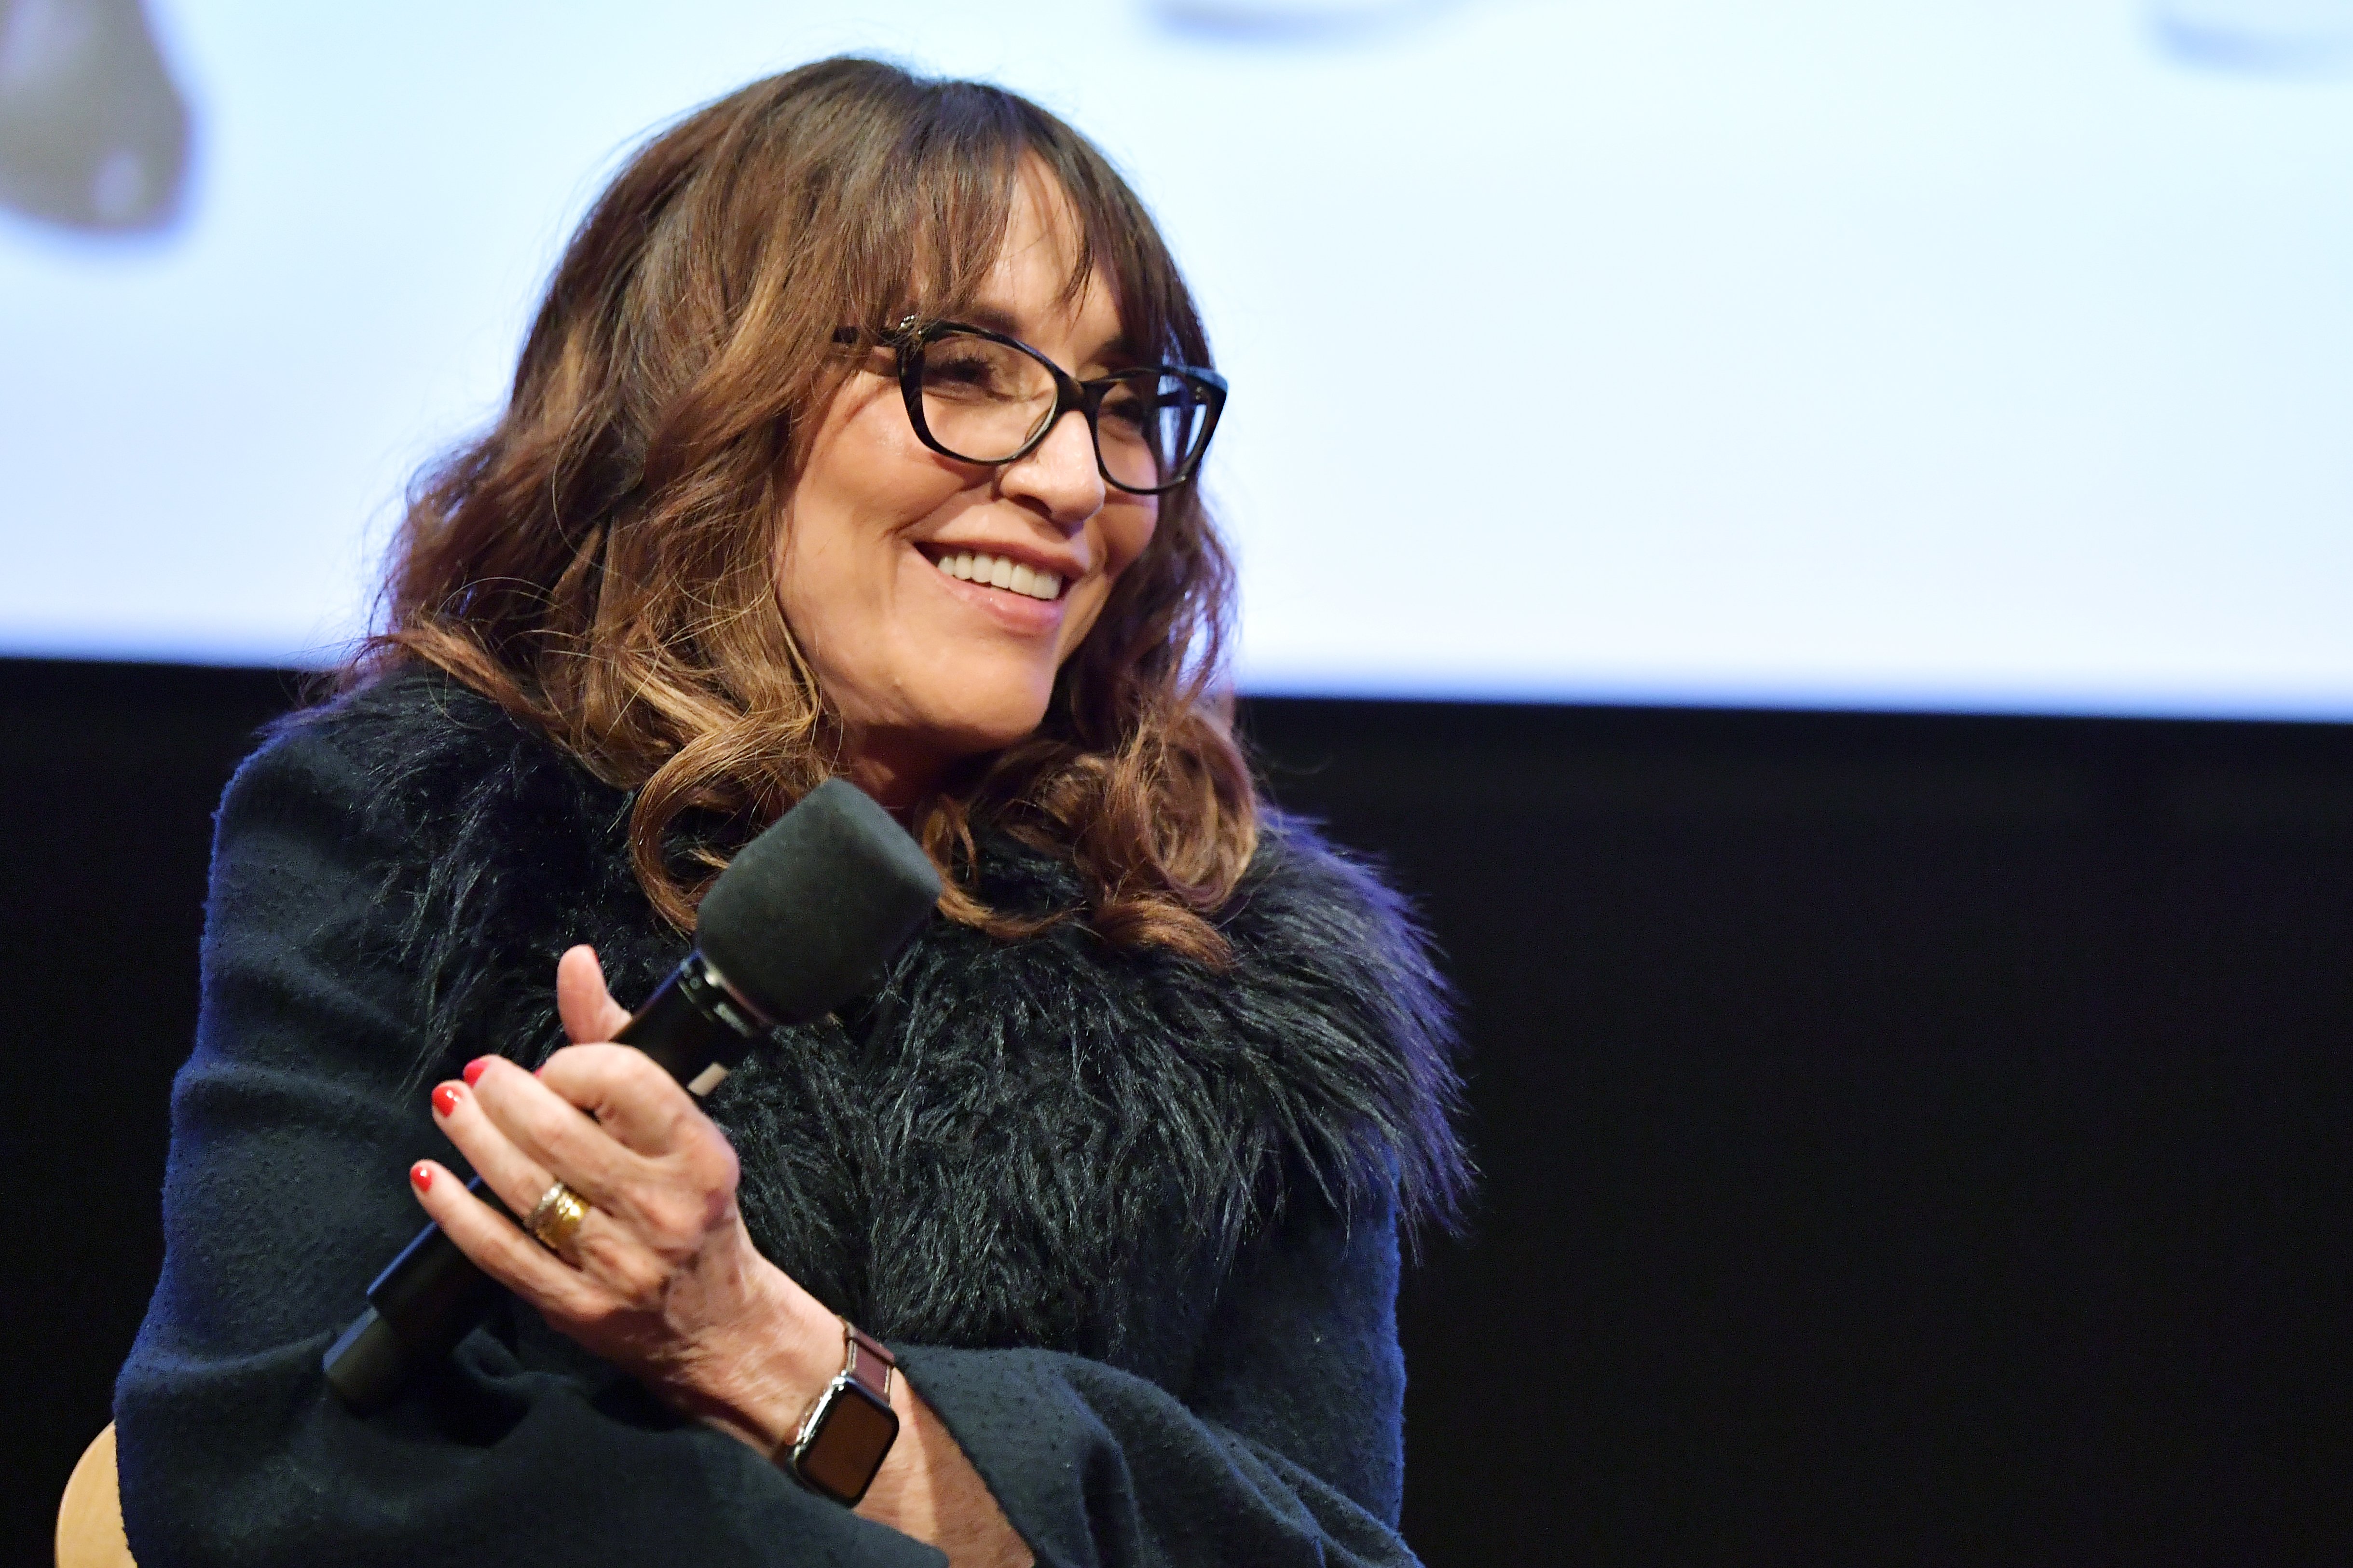 Katey Sagal at For Your Consideration Event For Showtime's "Shameless" | Source: Getty Images